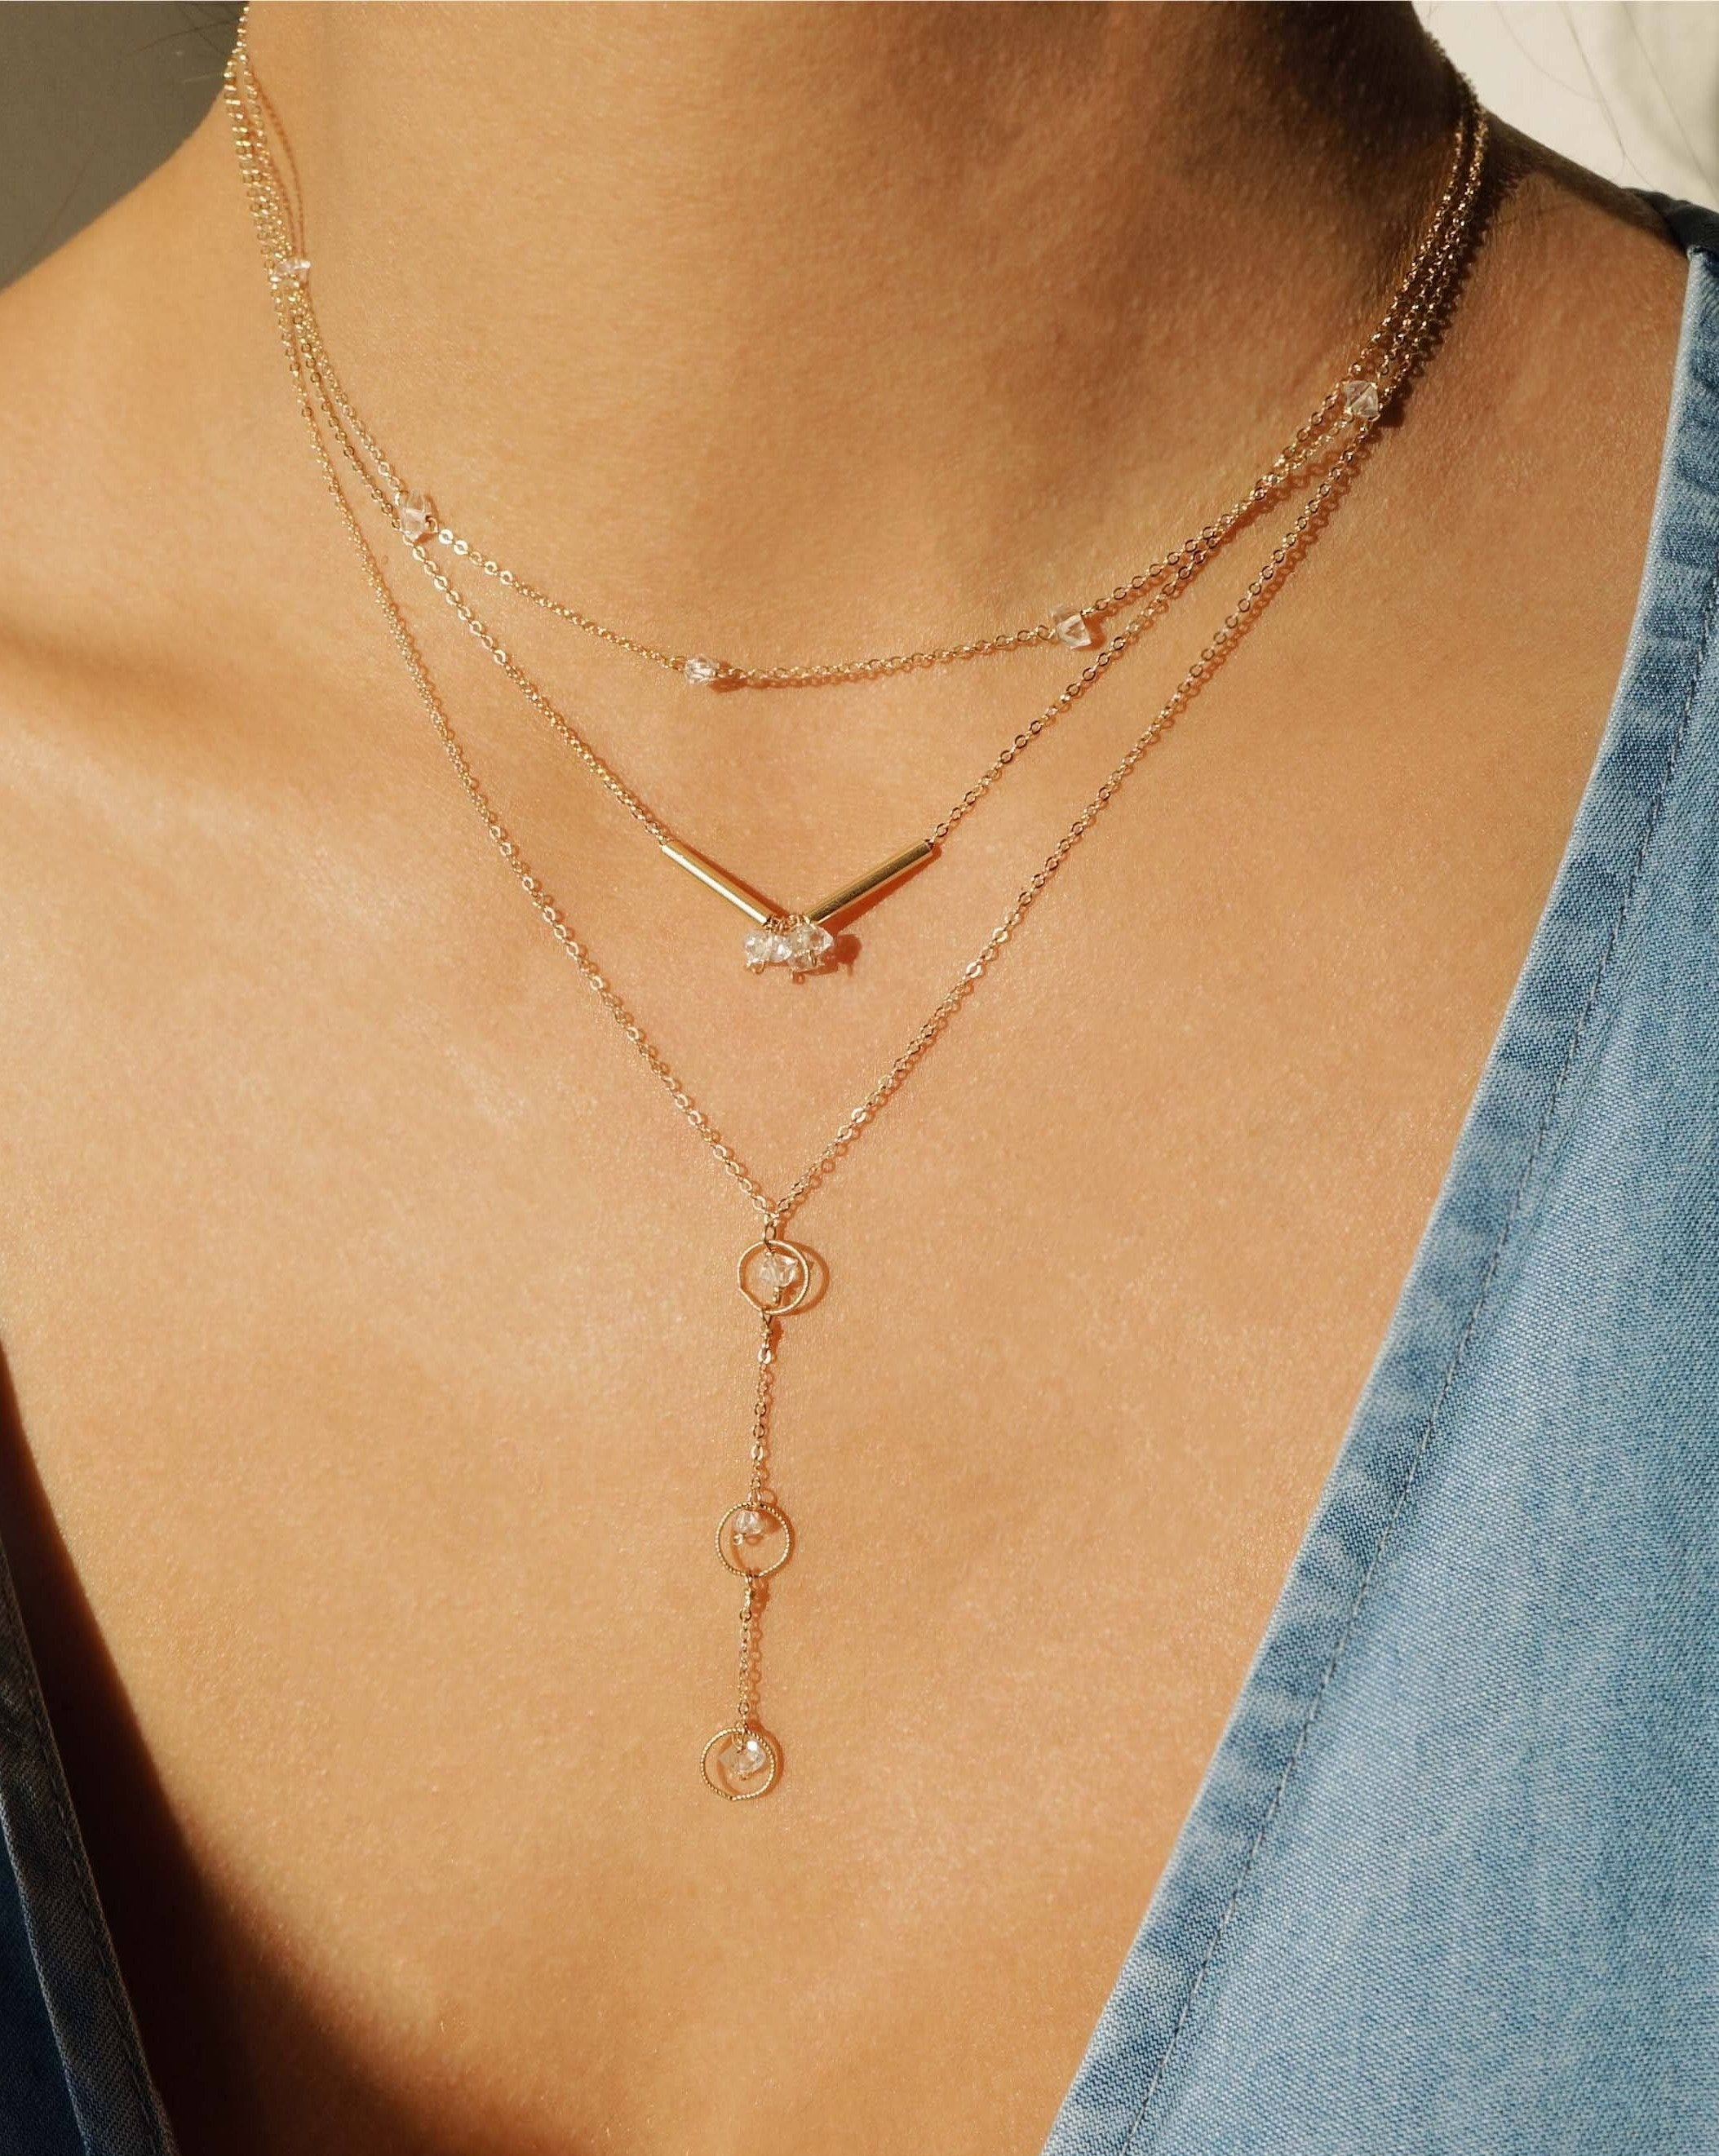 Tre Amos Necklace by KOZAKH. A 16 to 18 inch adjustable length, 1 1/2 inches drop lariat style necklace, crafted in 14K Gold Filled, featuring Herkimer Diamonds.